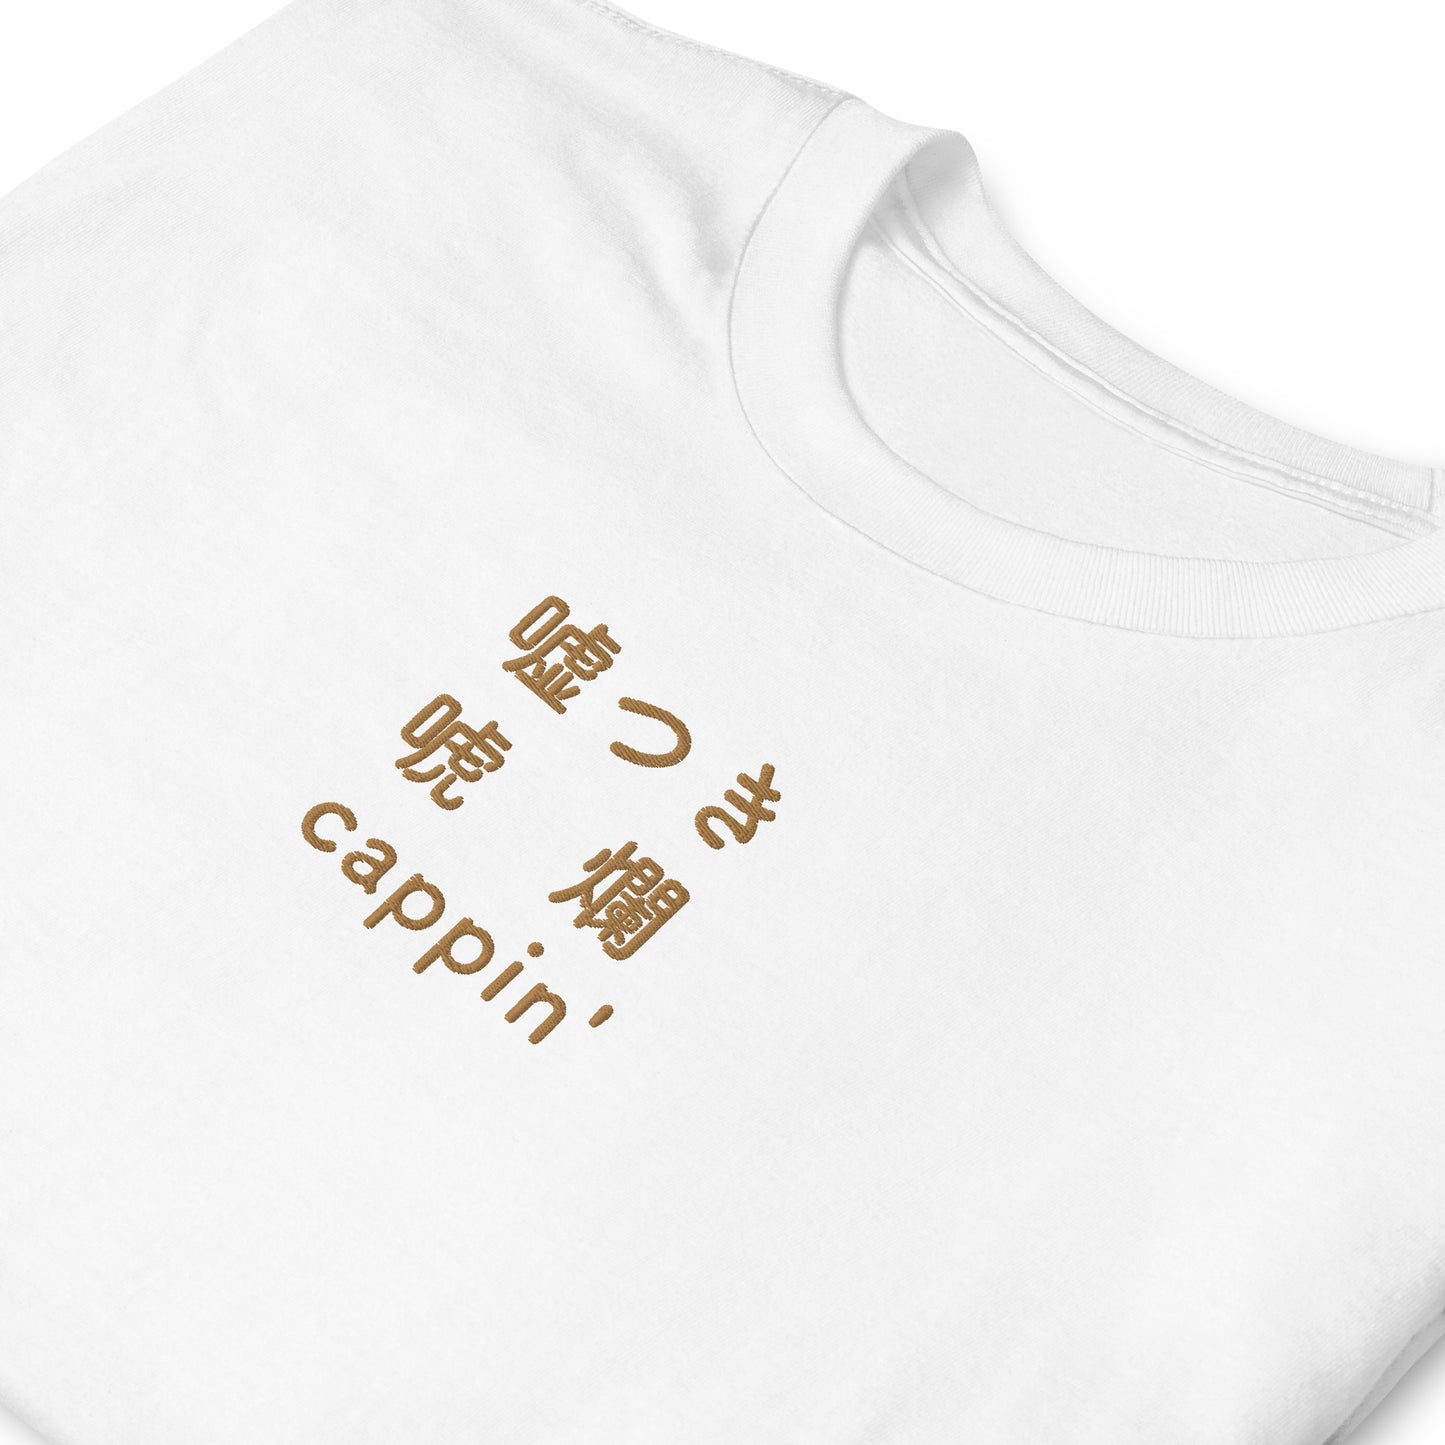 White High Quality Tee - Front Design with an Brown Embroidery "Cappin'" in Japanese,Chinese and English